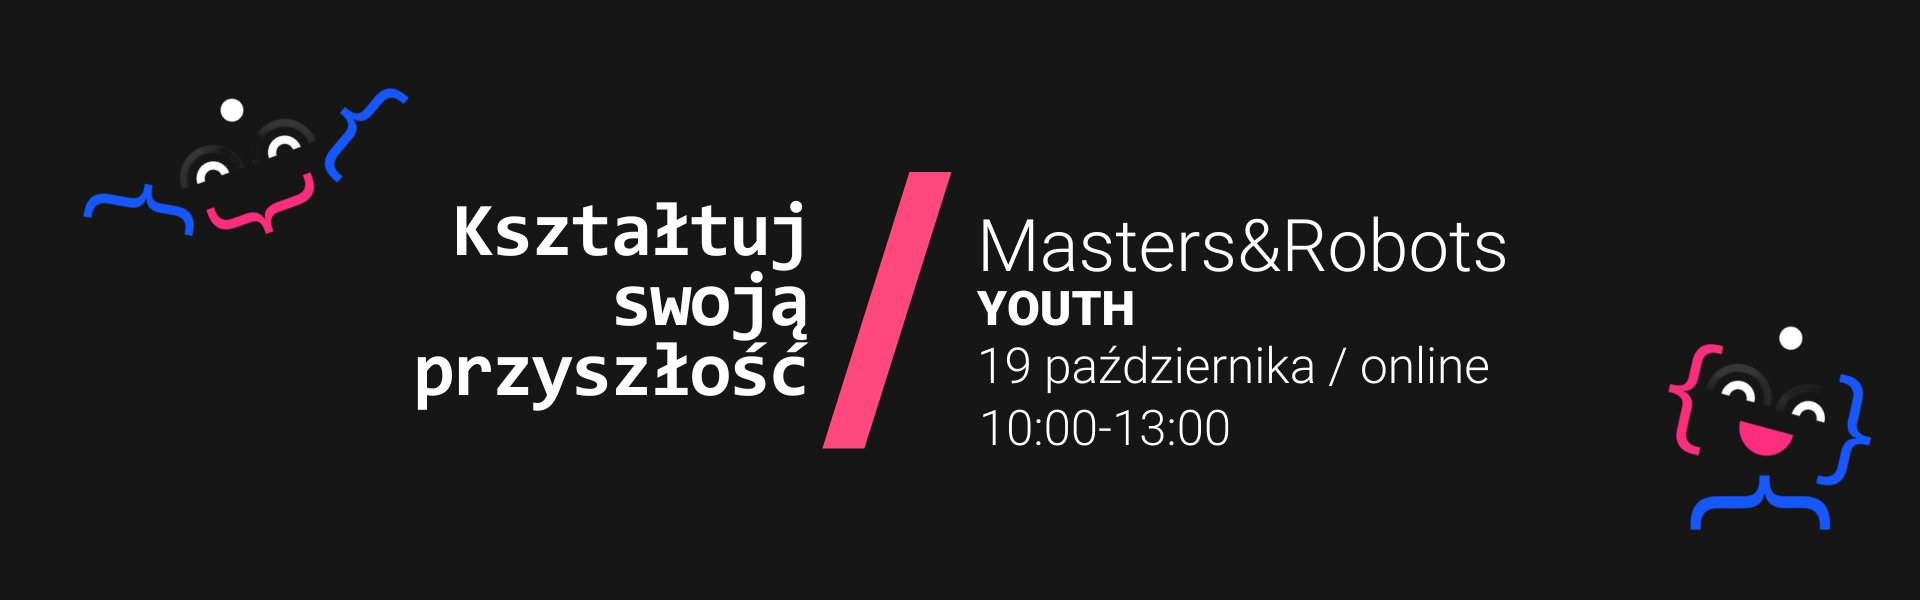 Masters&Robots Youth 